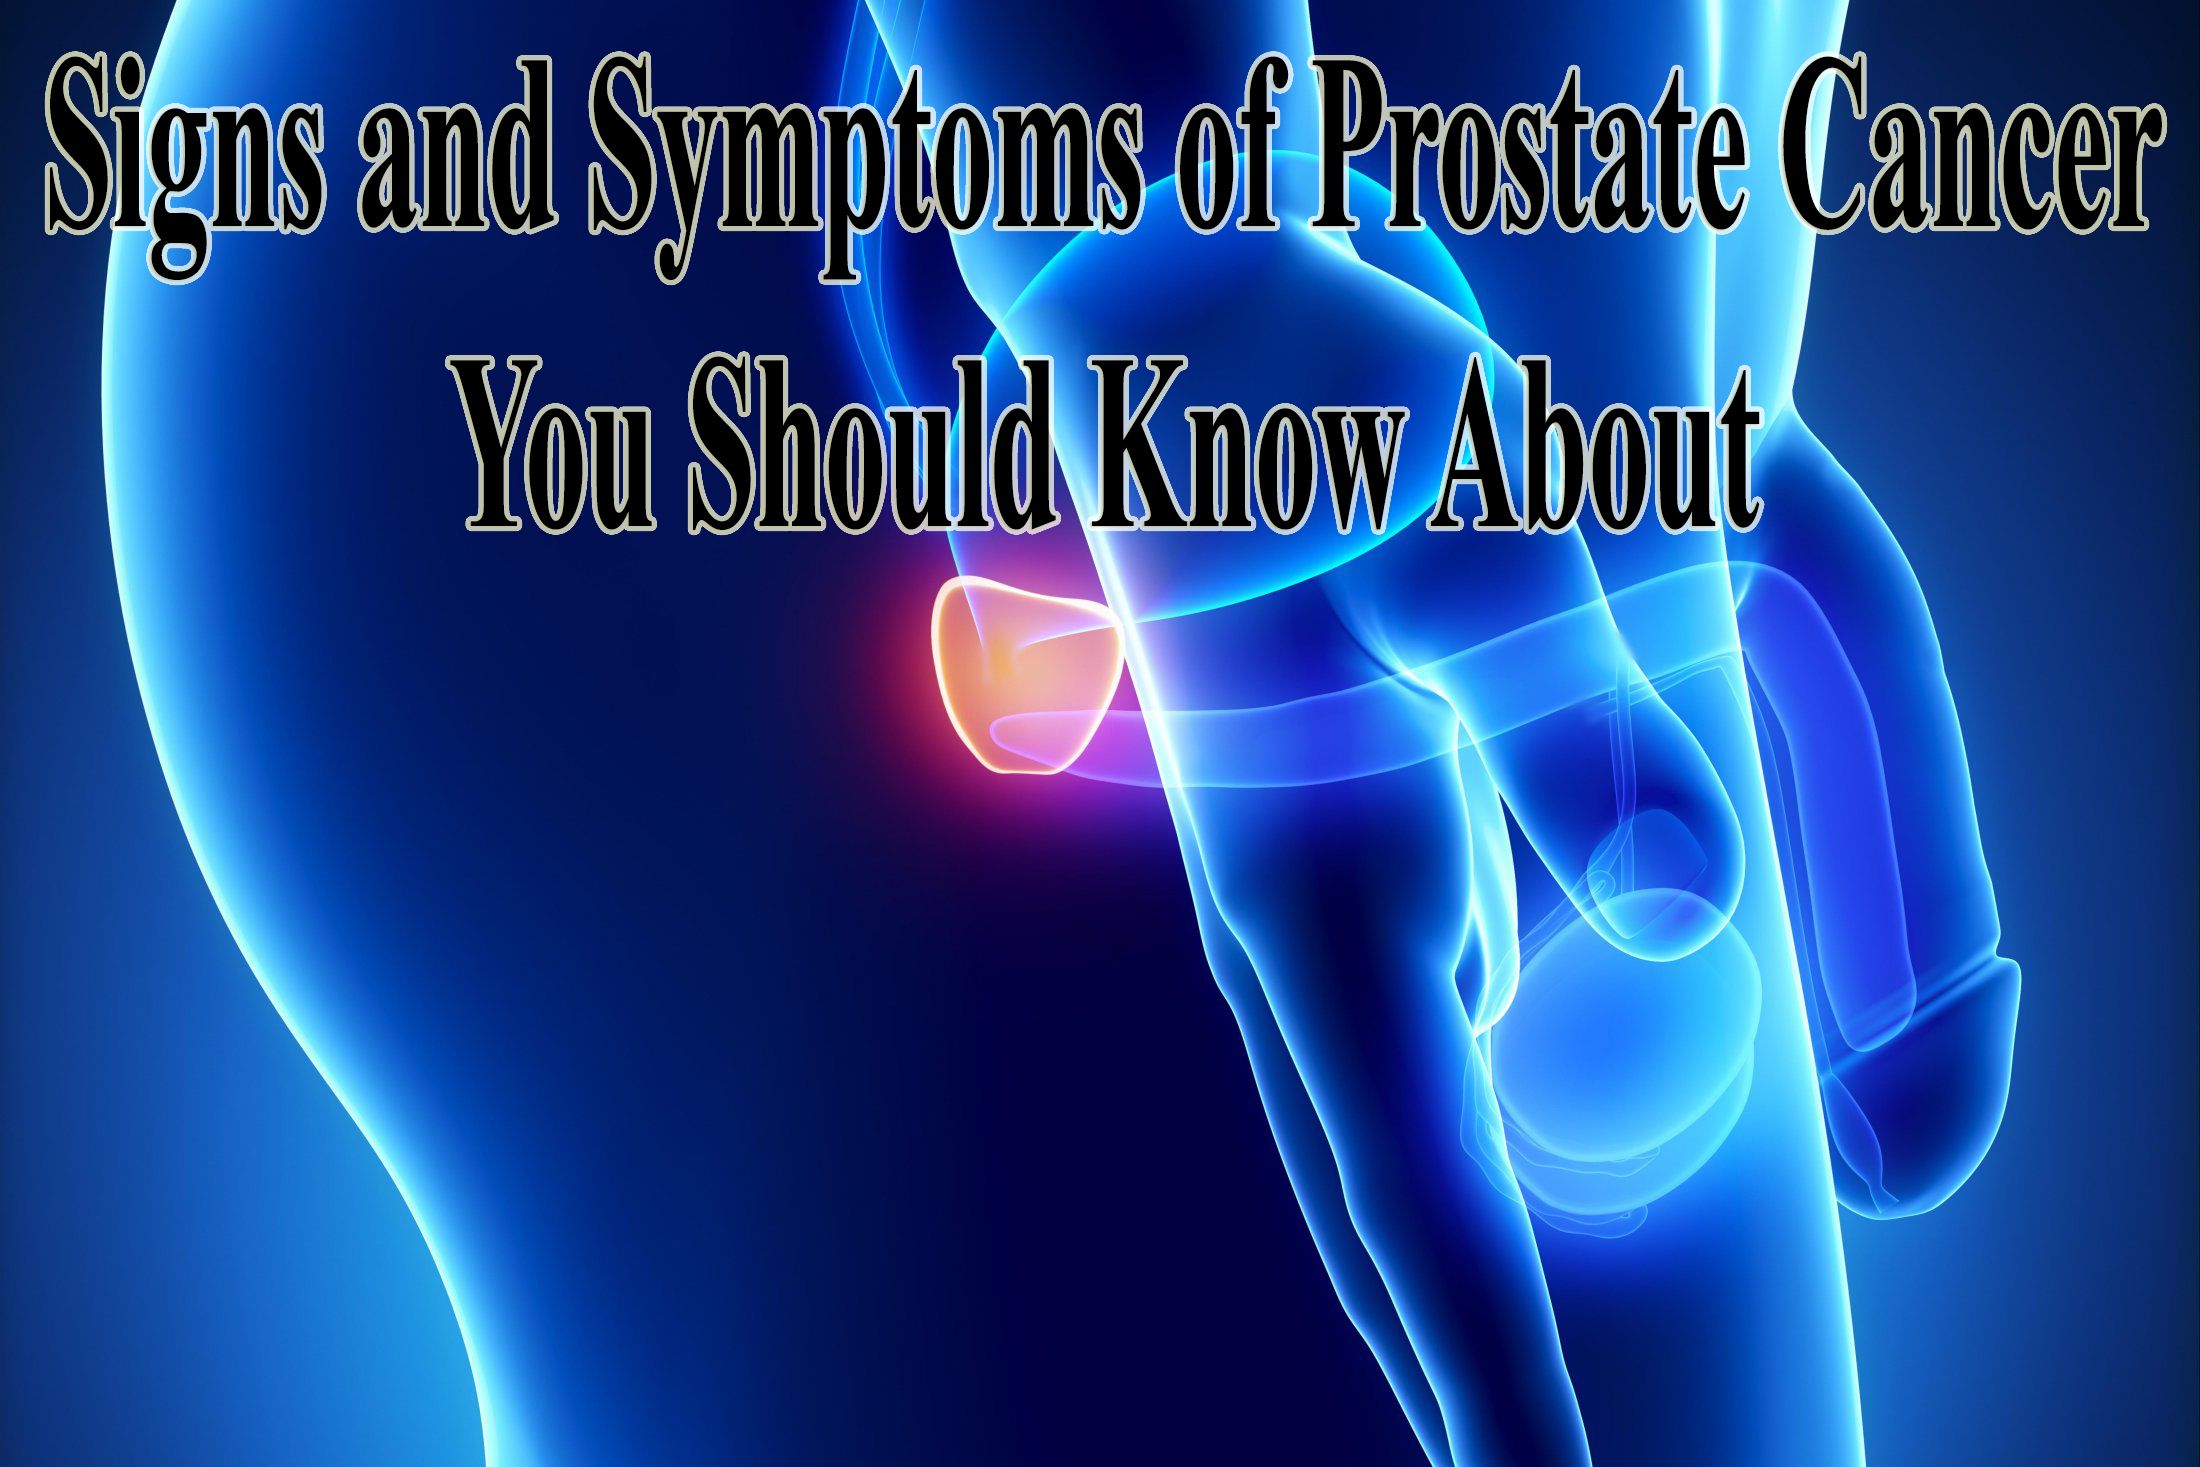 What Are The 5 Warning Signs Of Prostate Cancer